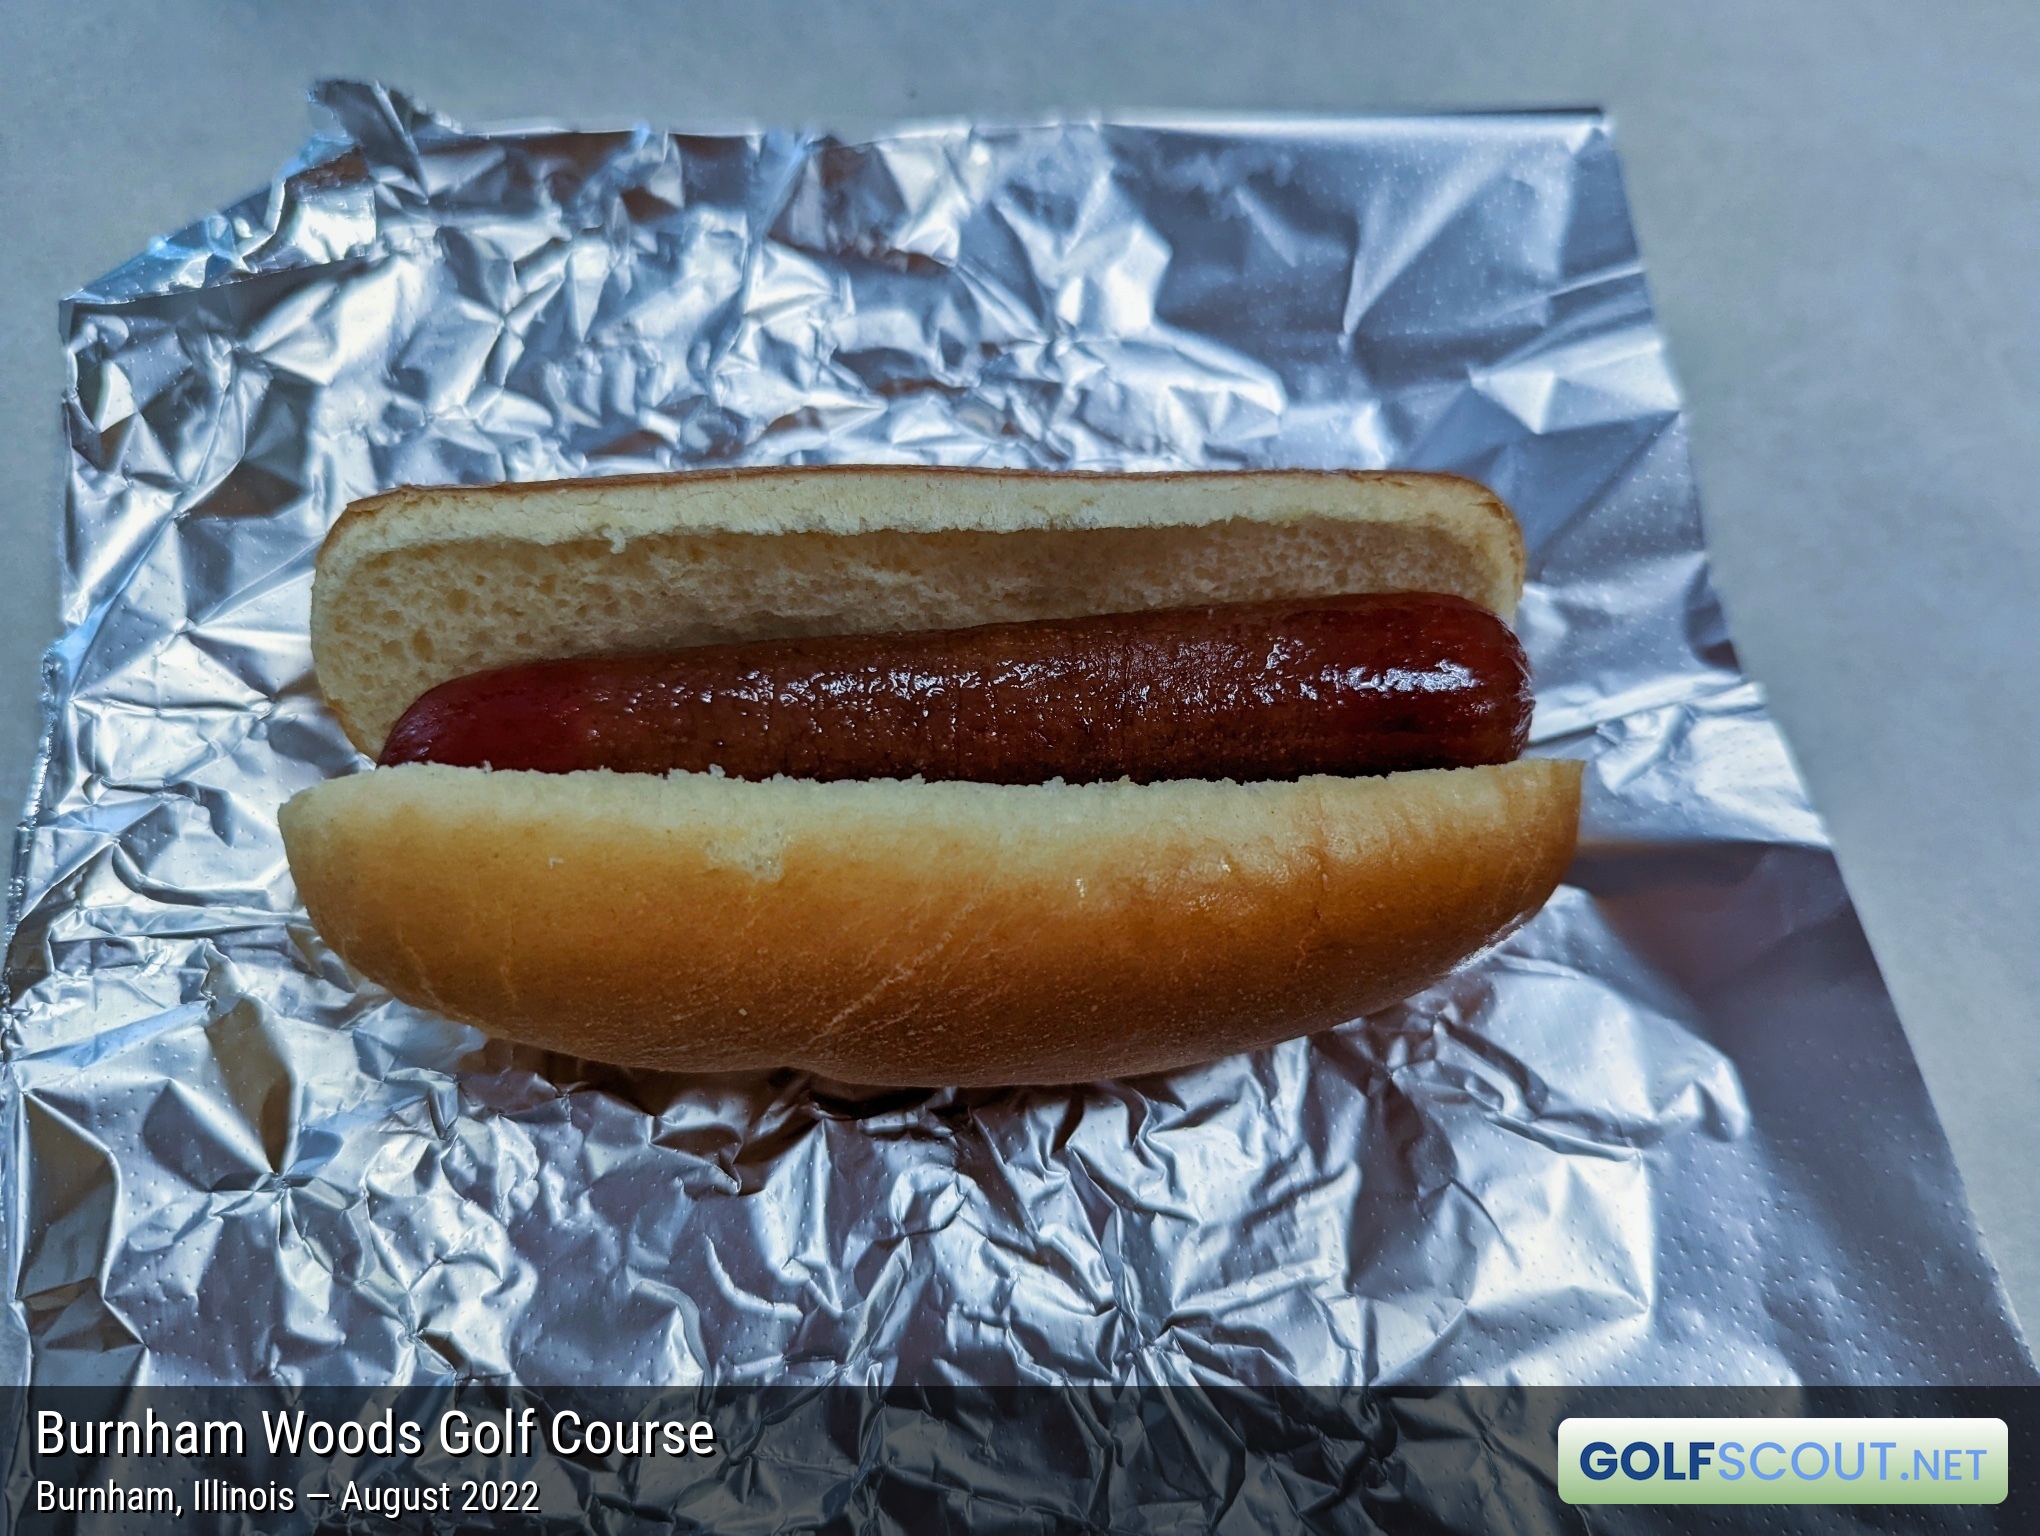 Photo of the food and dining at Burnham Woods Golf Course in Burnham, Illinois. Photo of the hot dog at Burnham Woods Golf Course in Burnham, Illinois.